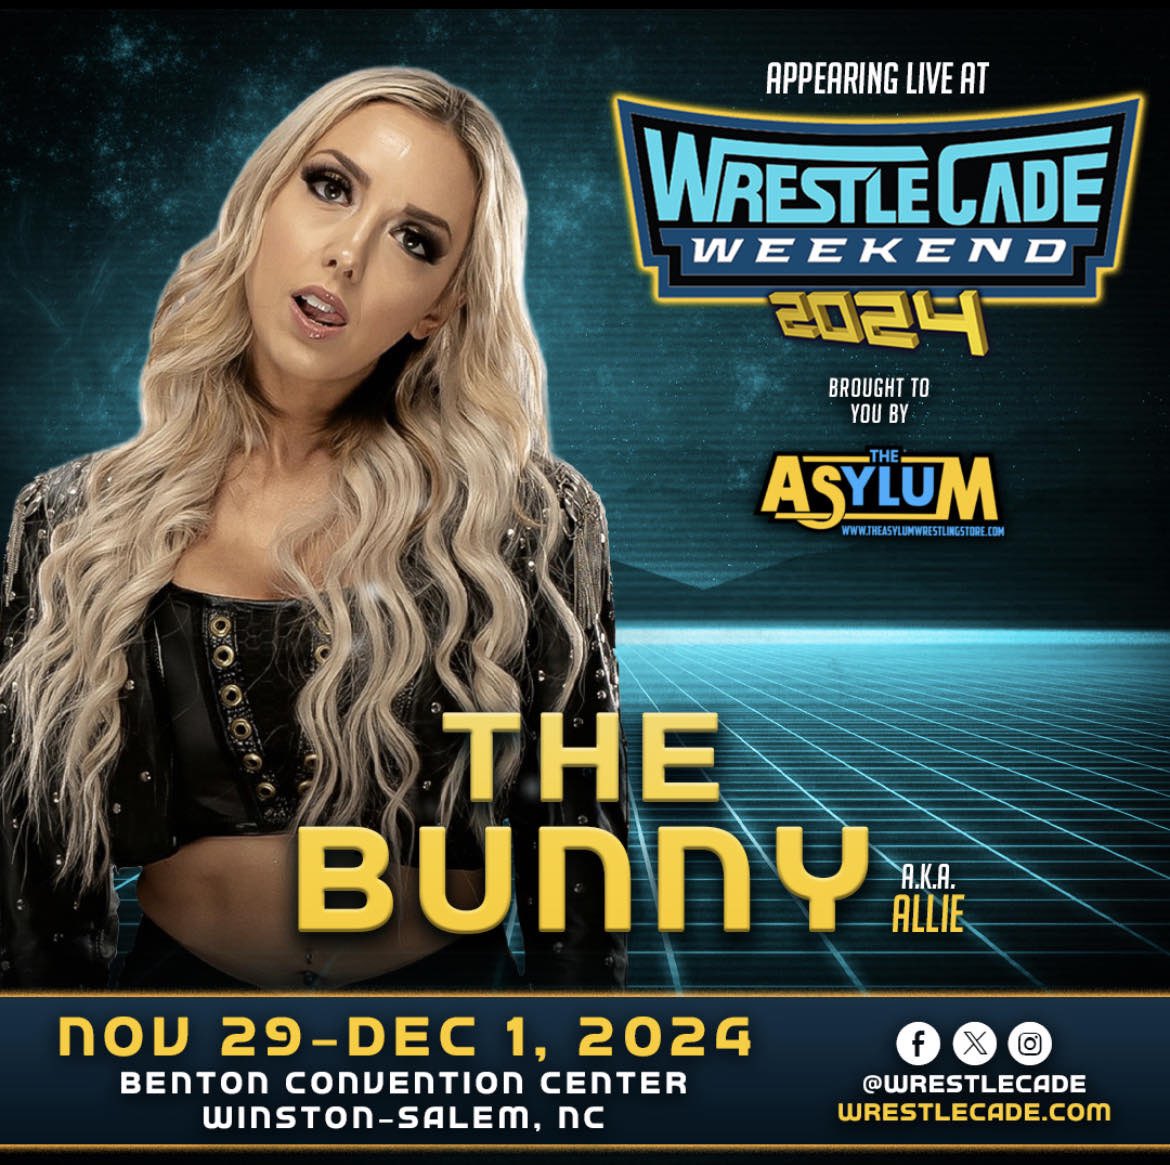 🚨 #WrestleCade Weekend returns with The Bunny aka Allie. Brought to you by our friends at @asylum_store Benton Convention Center Winston-Salem, NC Nov 29-30 & Dec 1 🎟 at wrestlecade.com/tickets